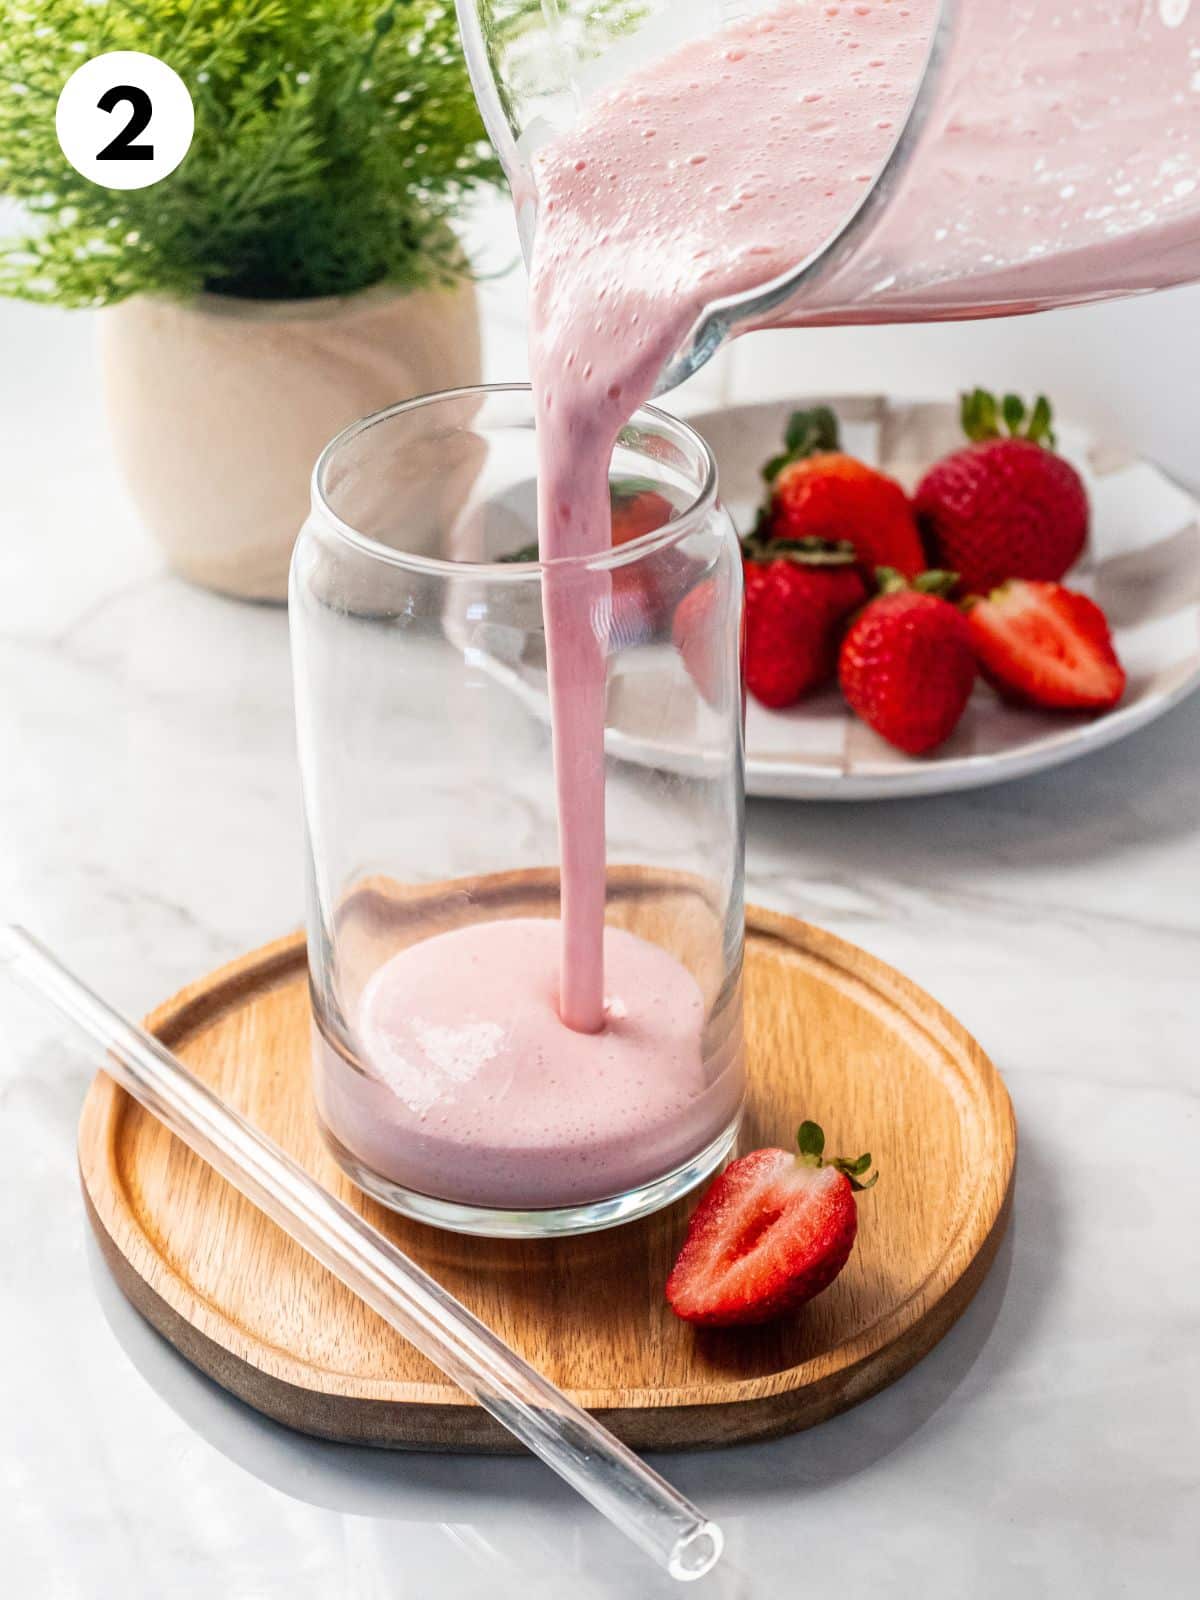 Pouring a strawberry smoothie into a glass.